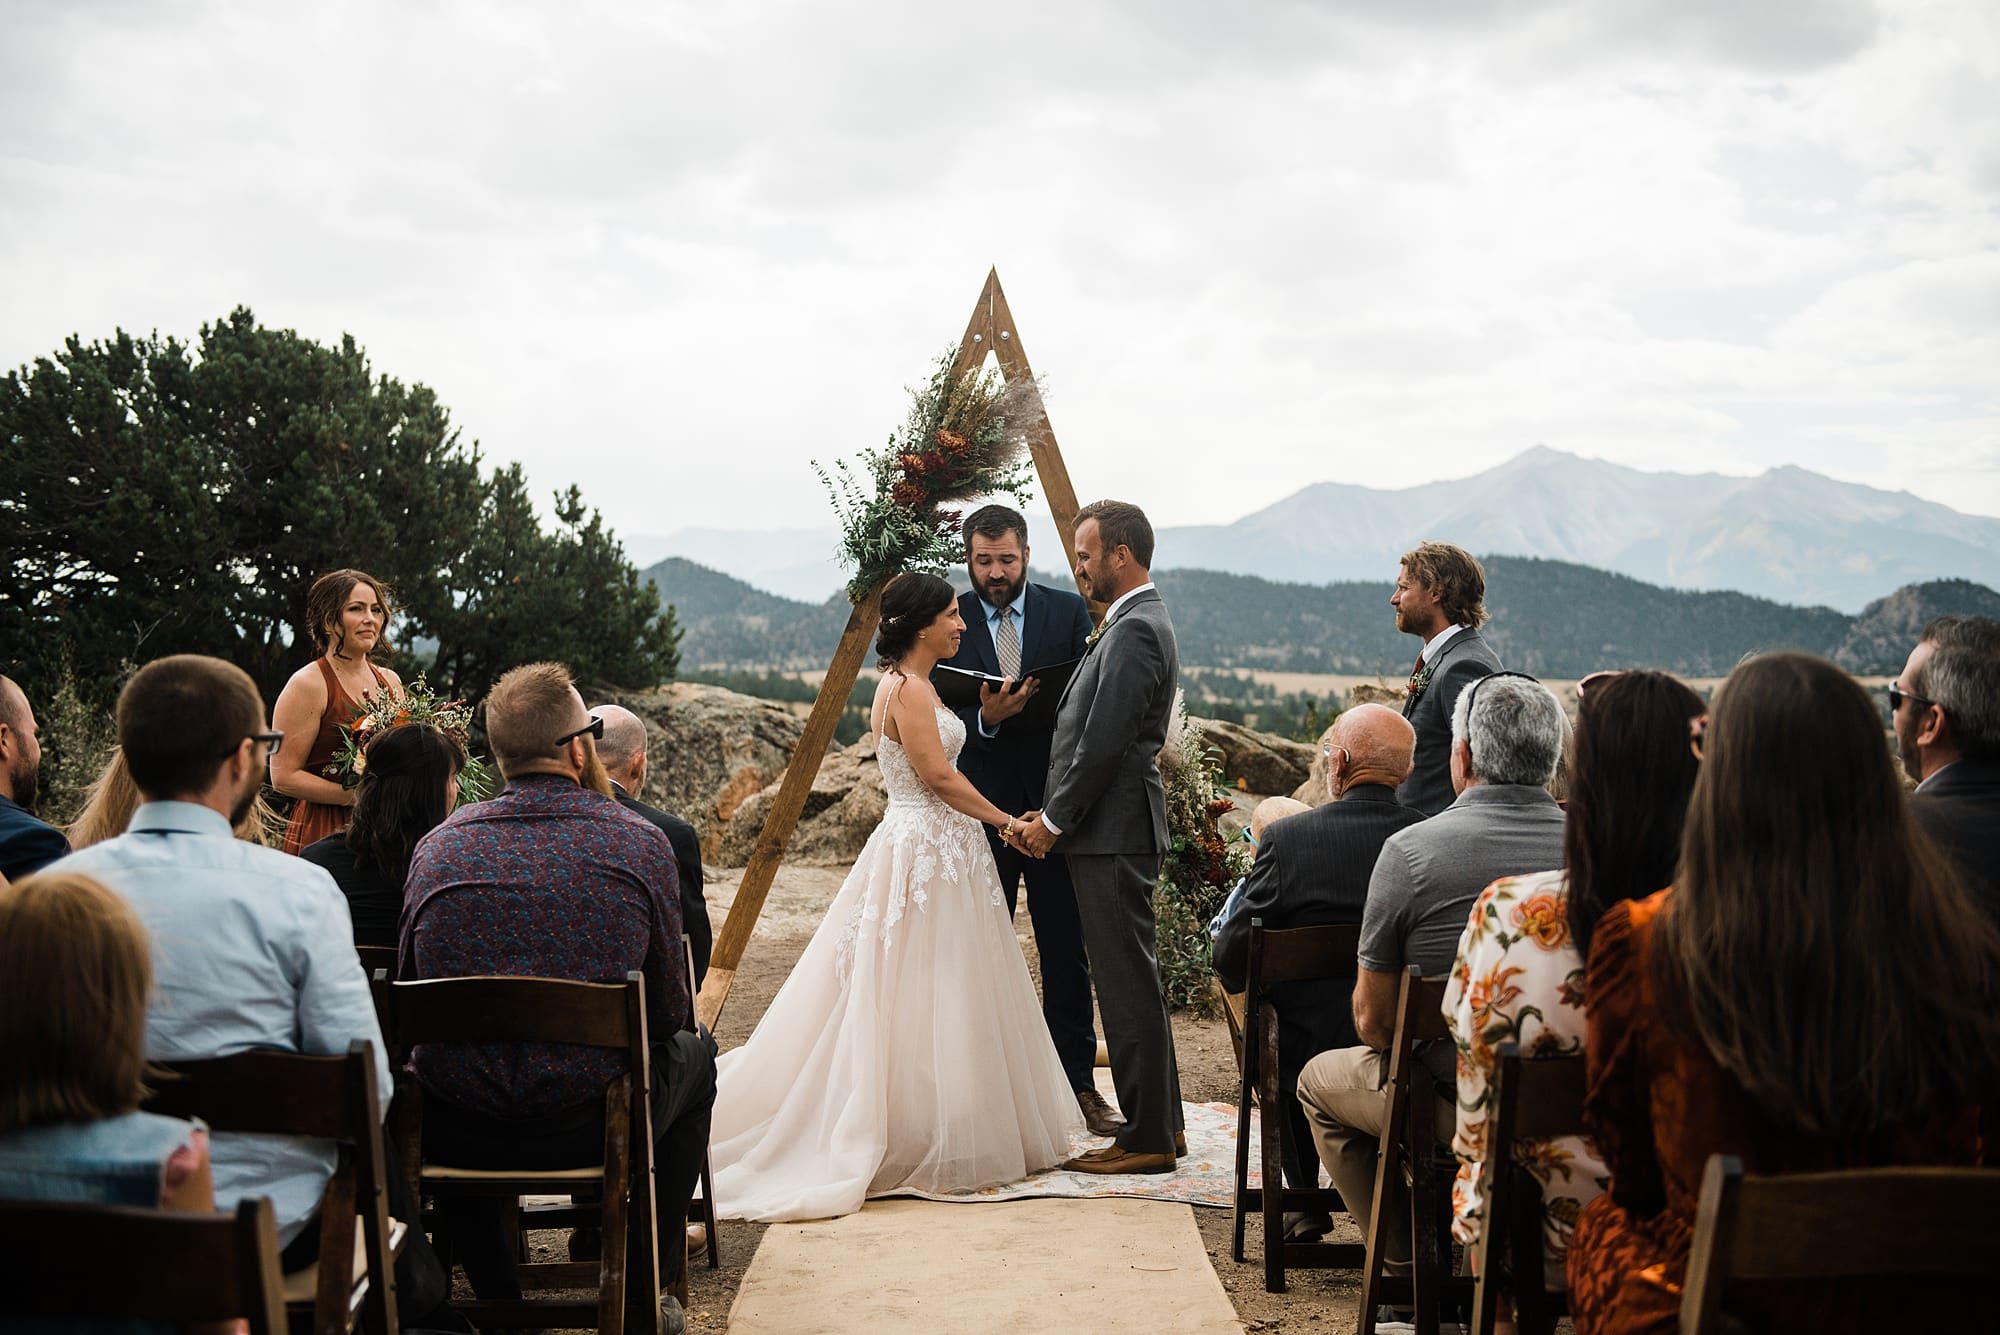 A couple stands in front of a wooden arch during their vow ceremony in Buena Vista, Colorado